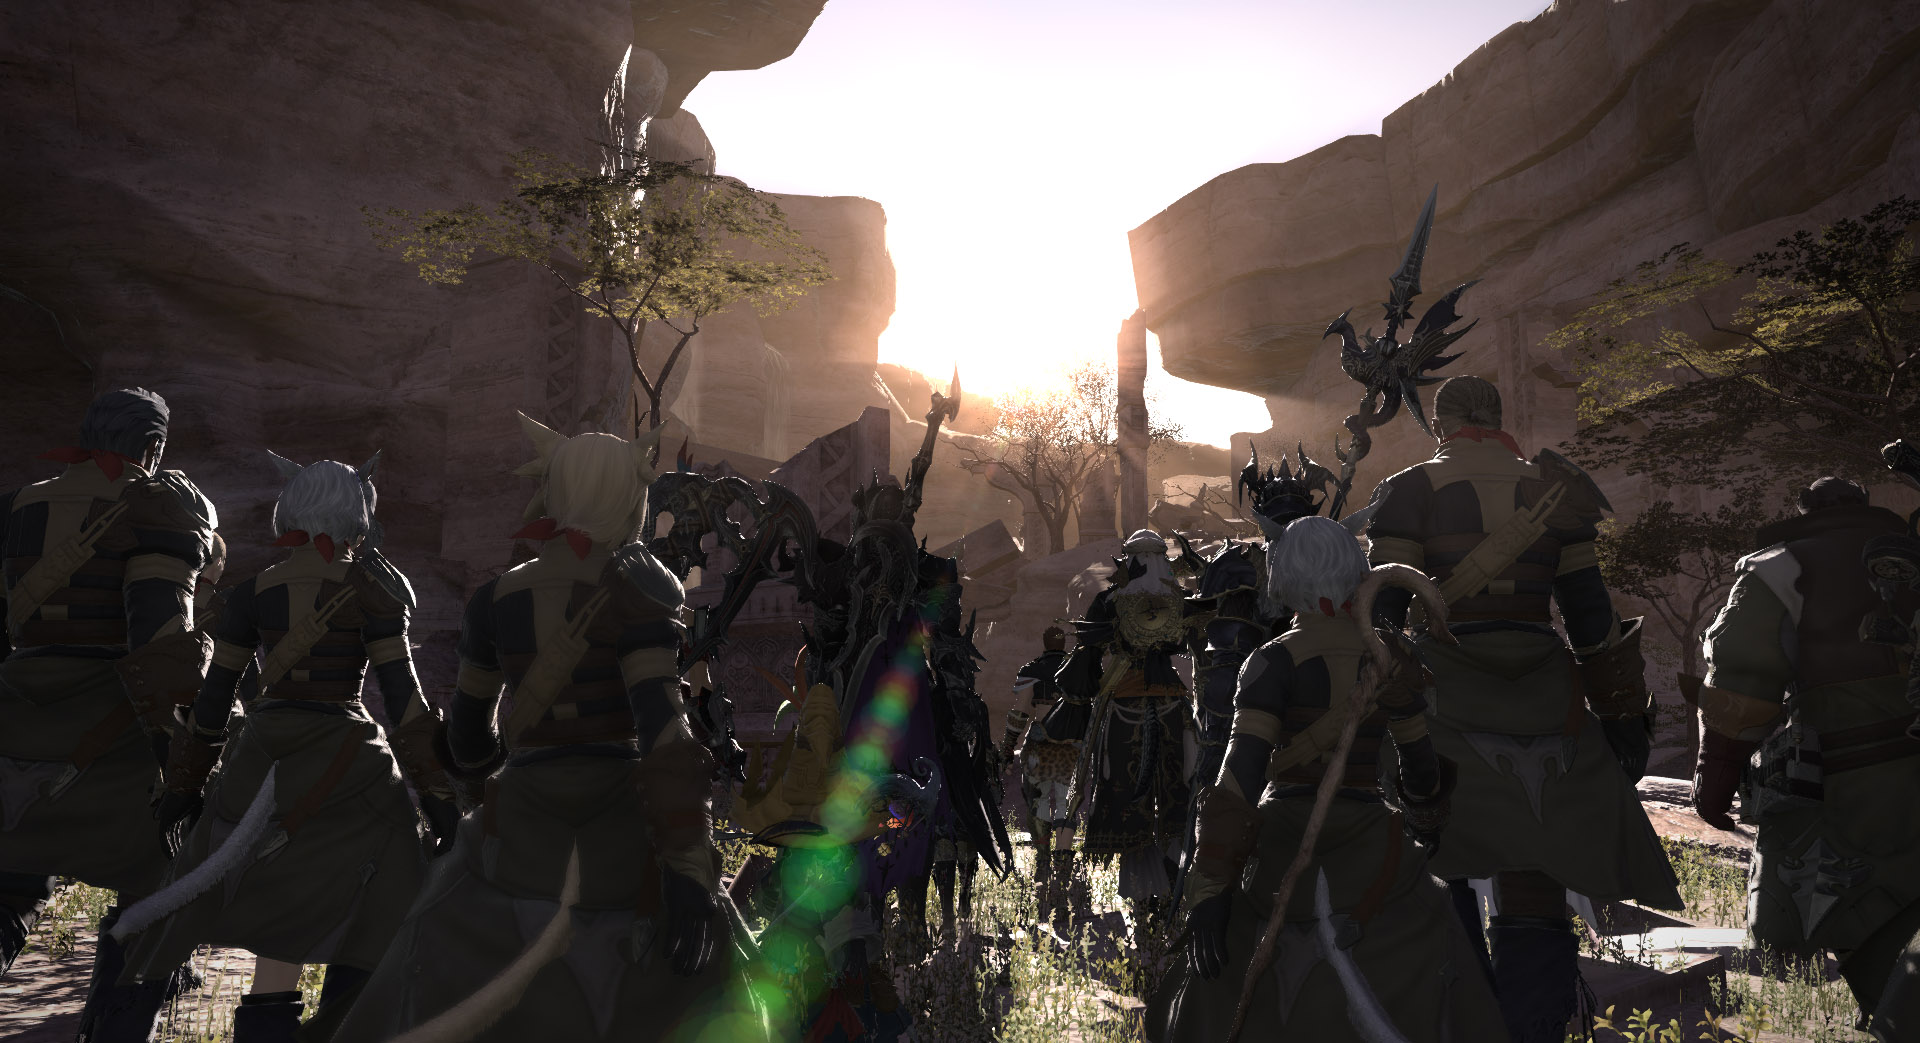 Final Fantasy 14— a group of adventurers look to the sunset